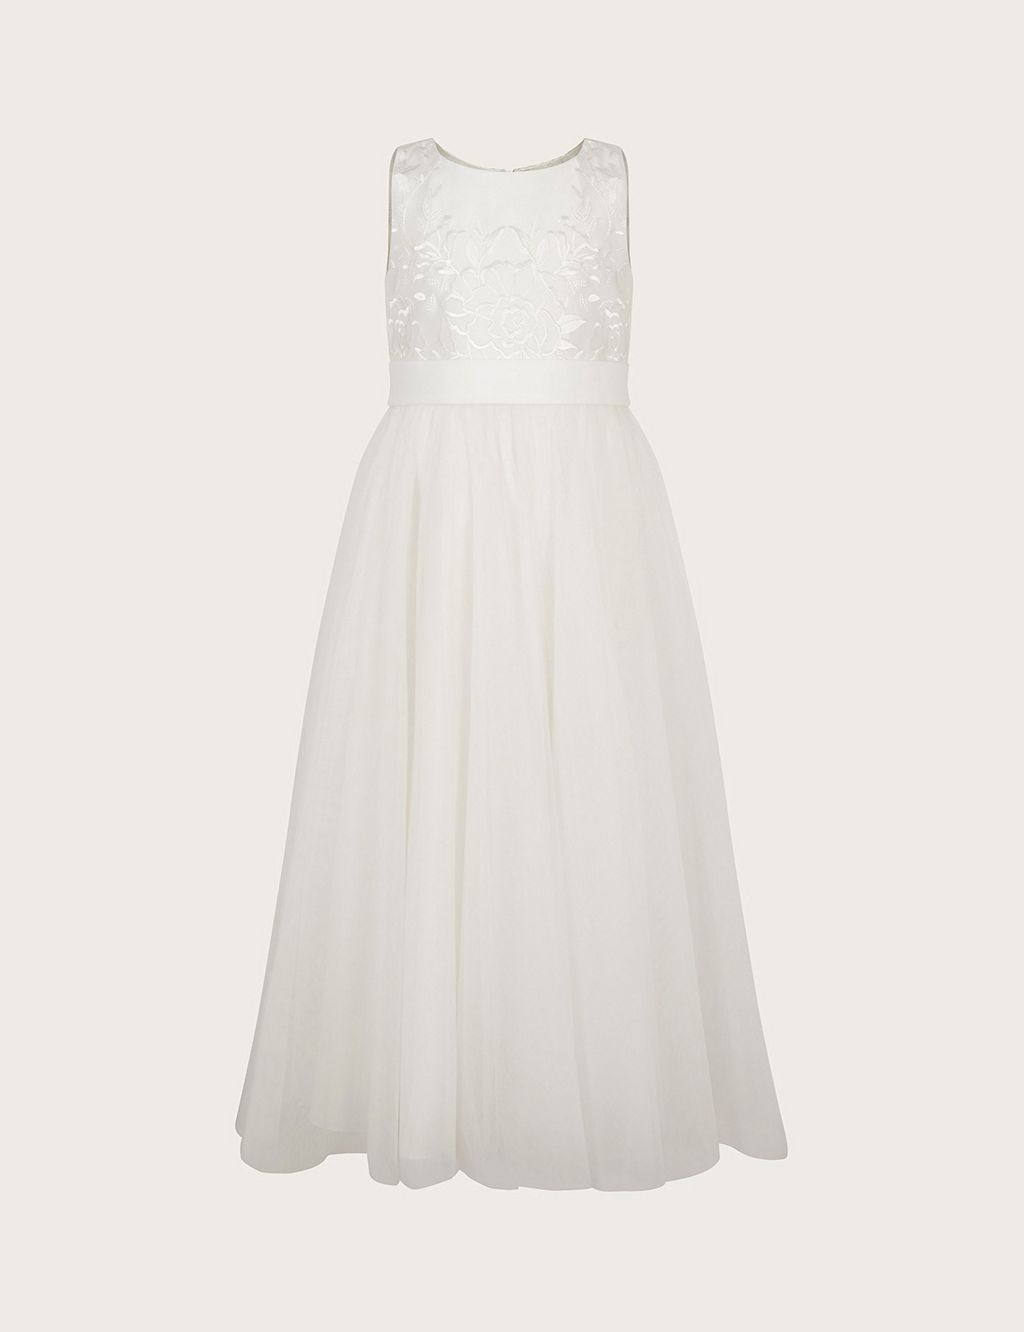 Embroidered Tulle Occasion Dress (3-13 Yrs) 1 of 5